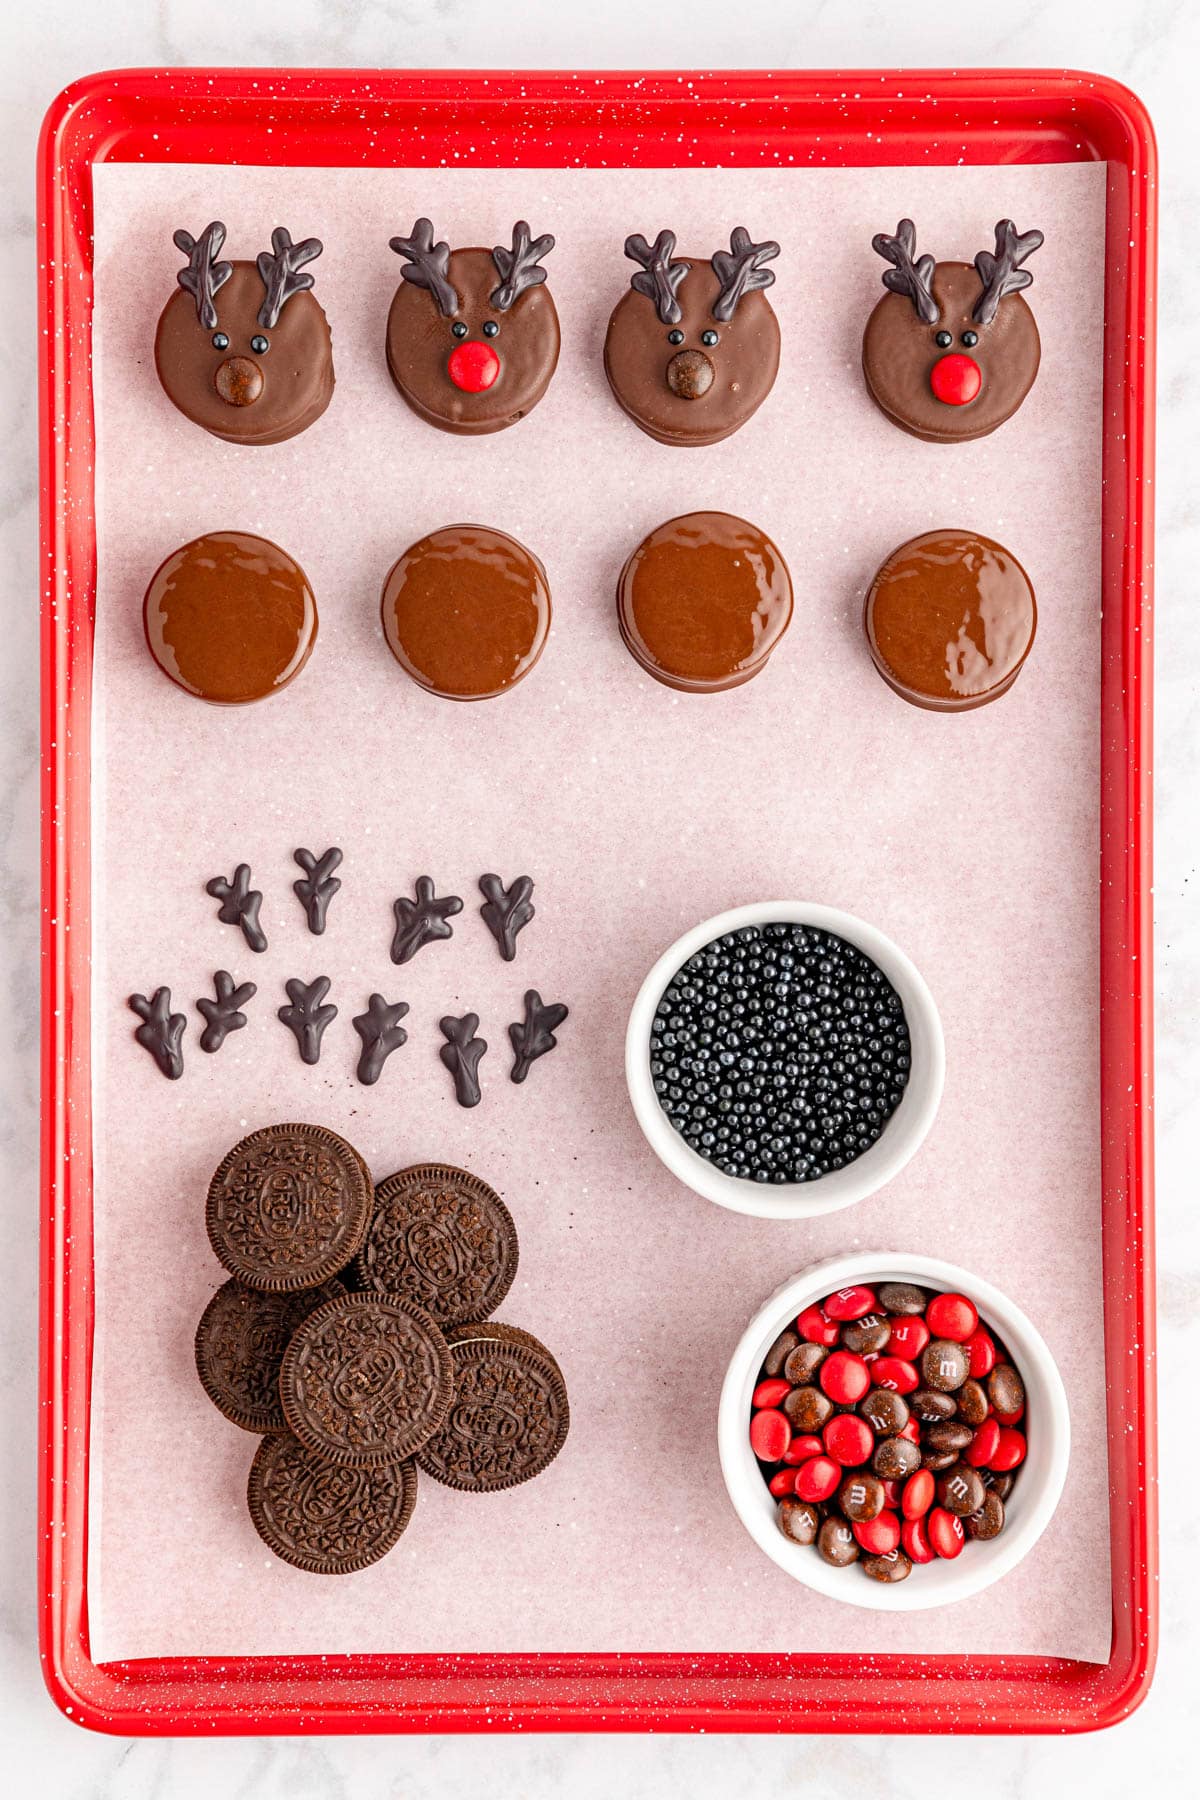 Chocolate reindeer cookies on a red tray.